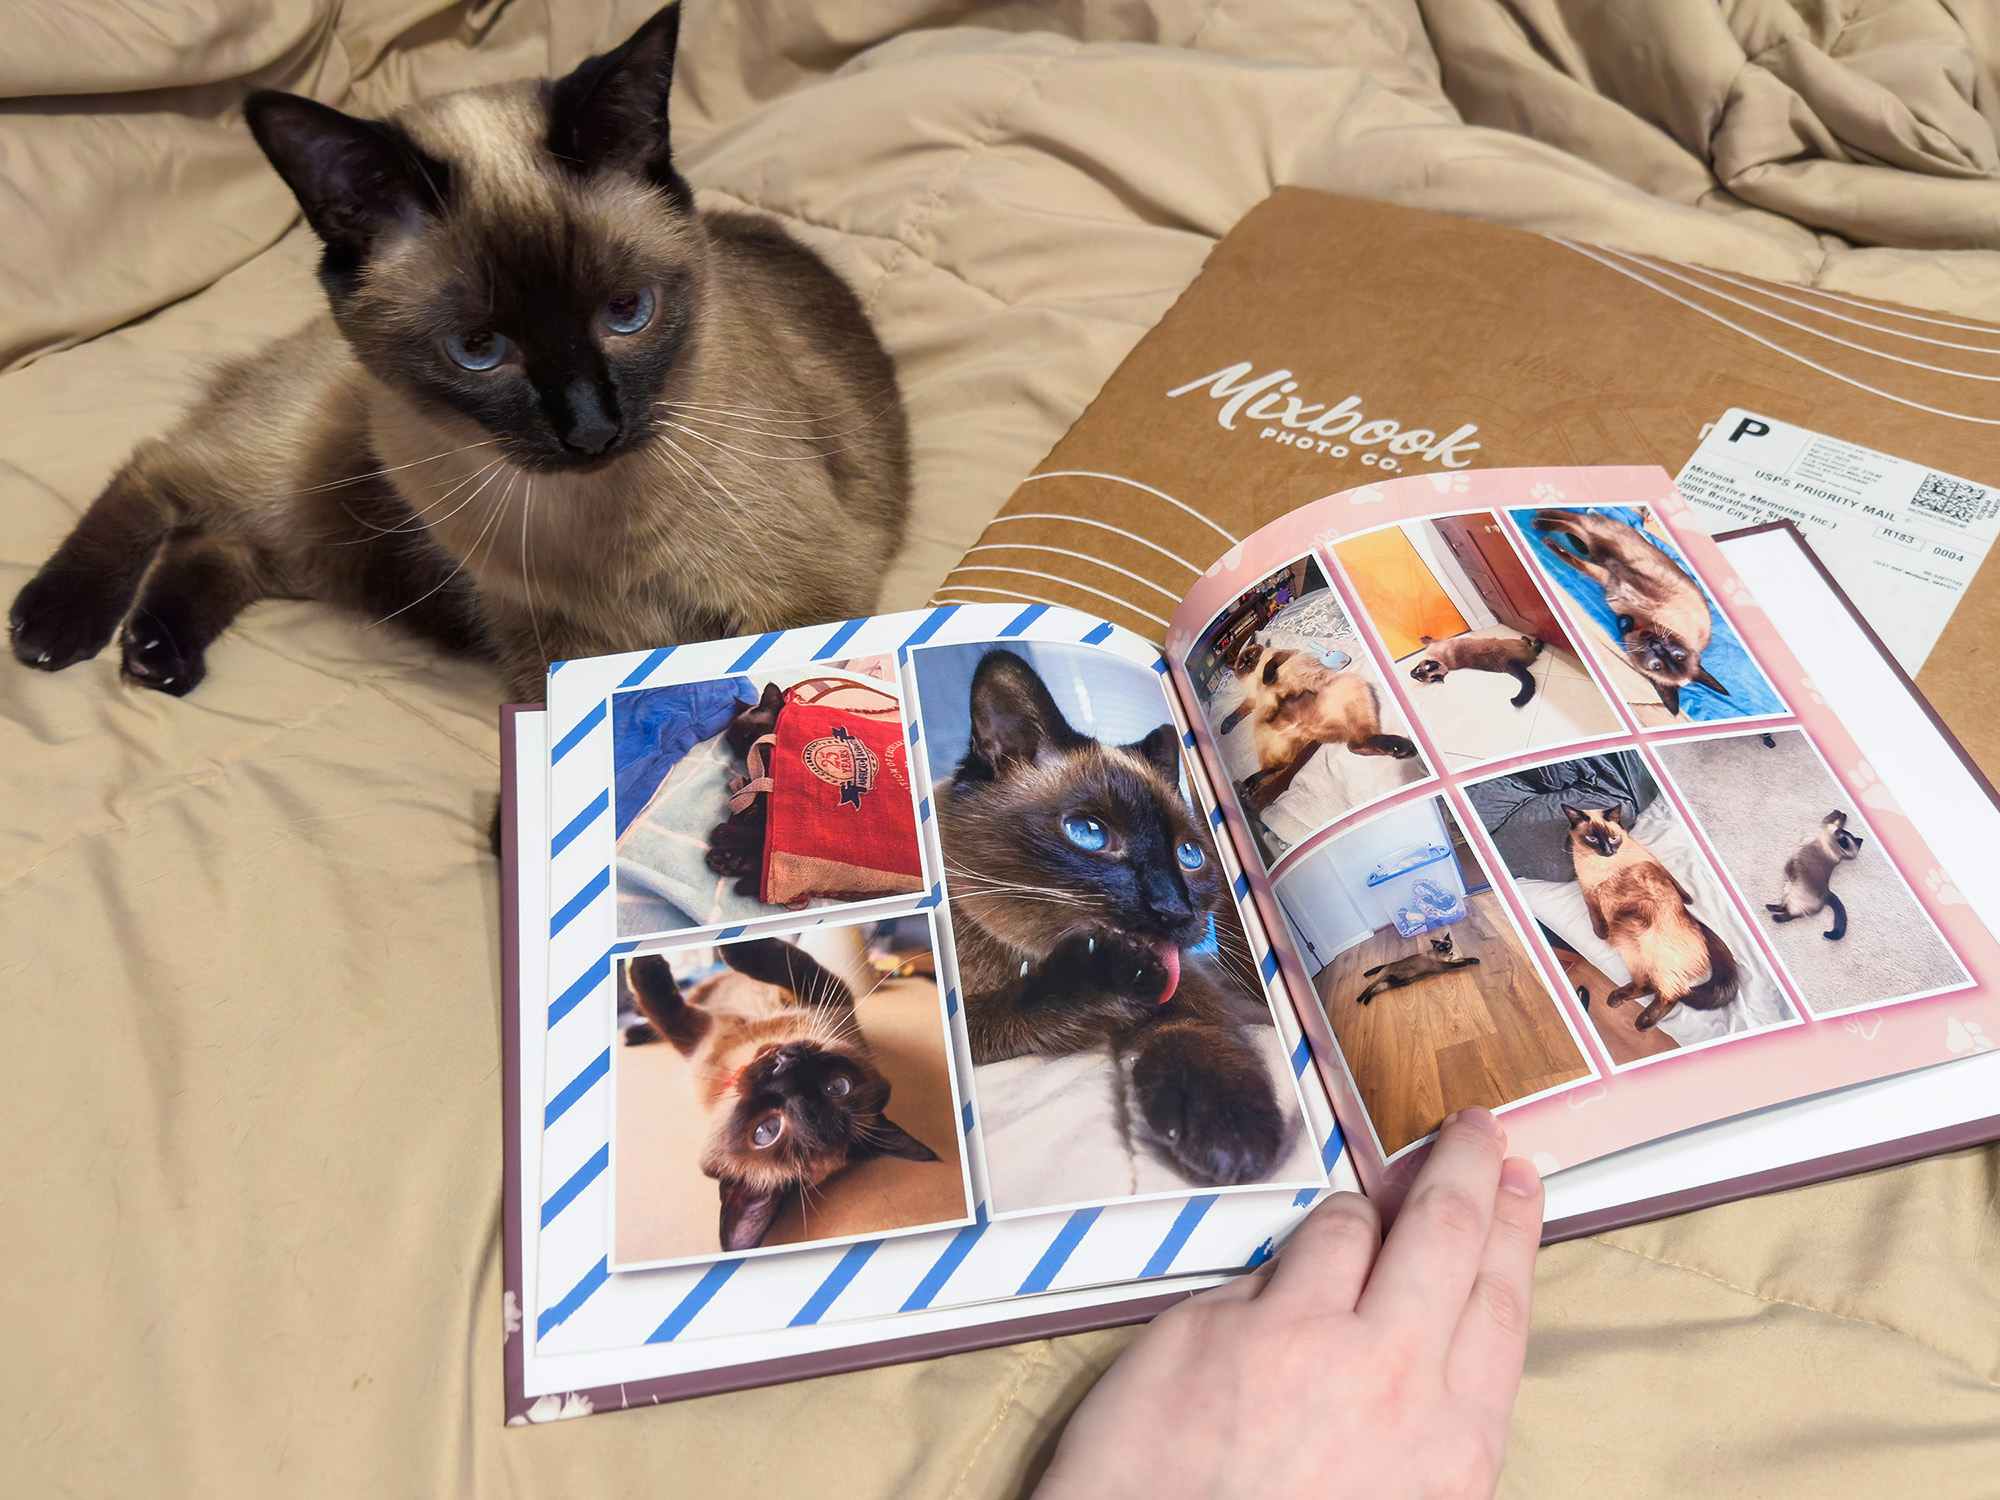 A cat laying next to a Mixbook pet photo book open, showing photos of the cat